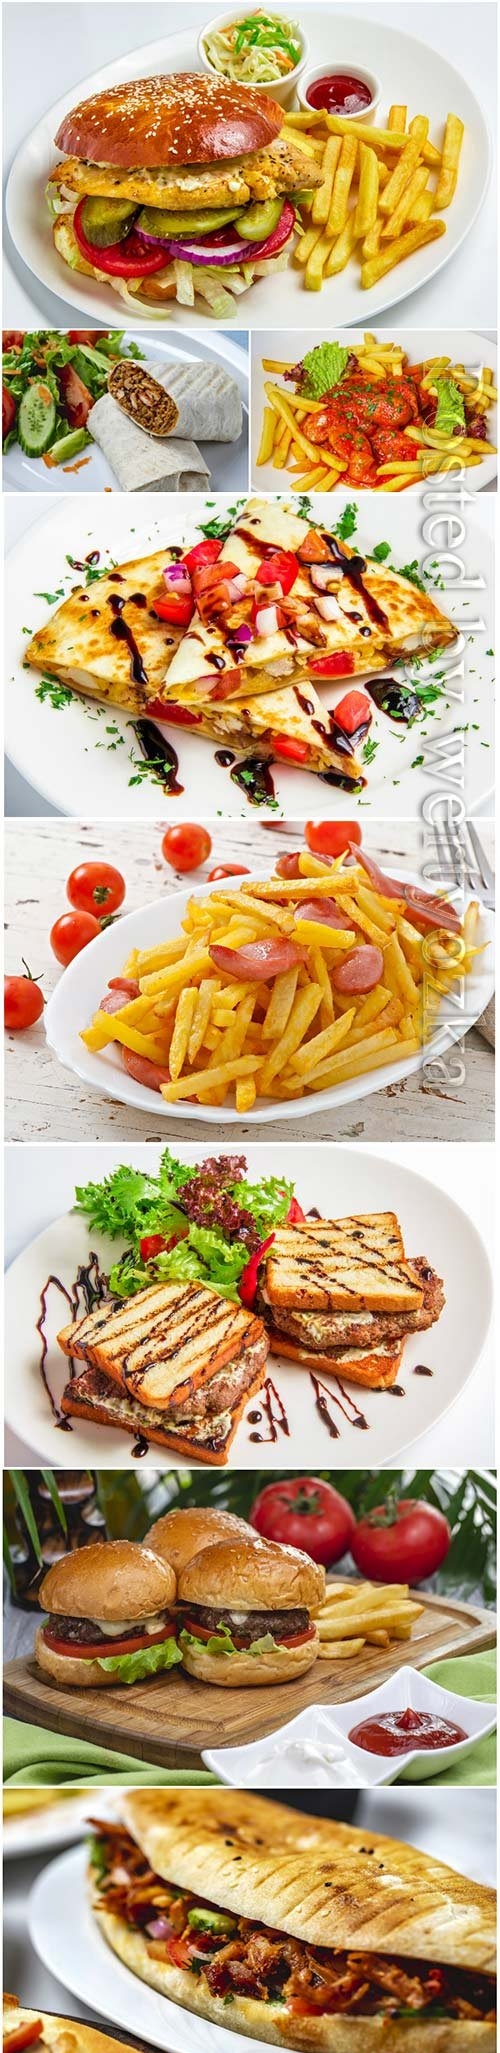 Fast food, delicious burgers and fries